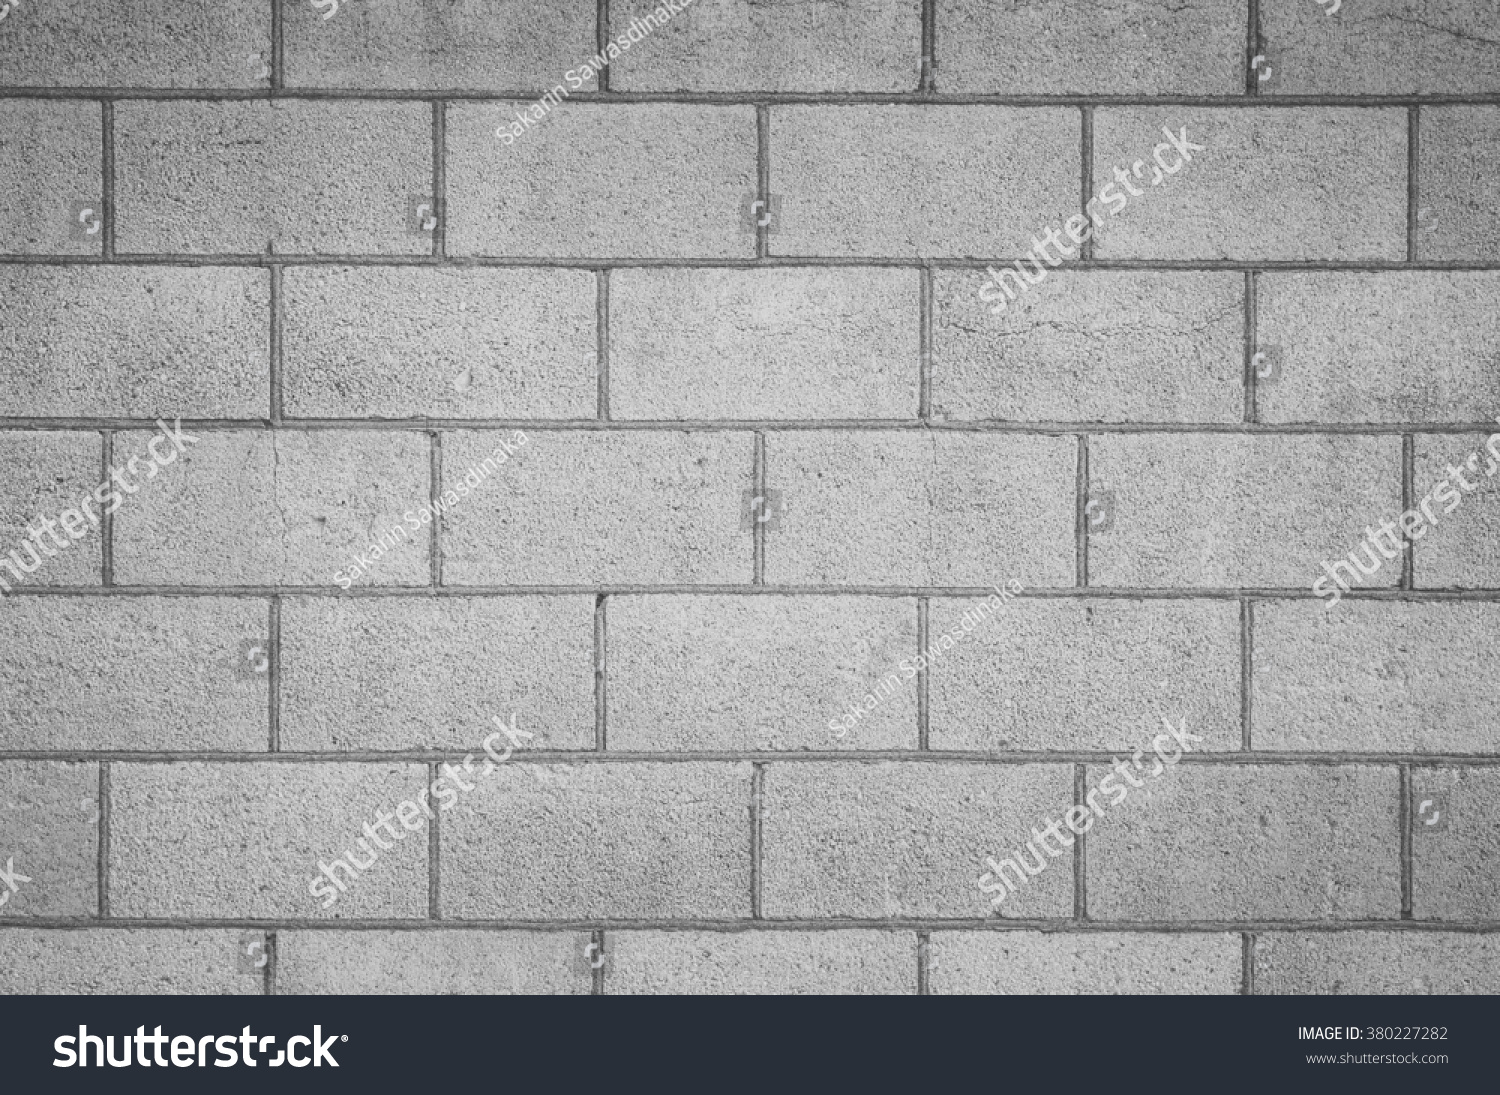 Concrete block wall seamless background and texture #380227282